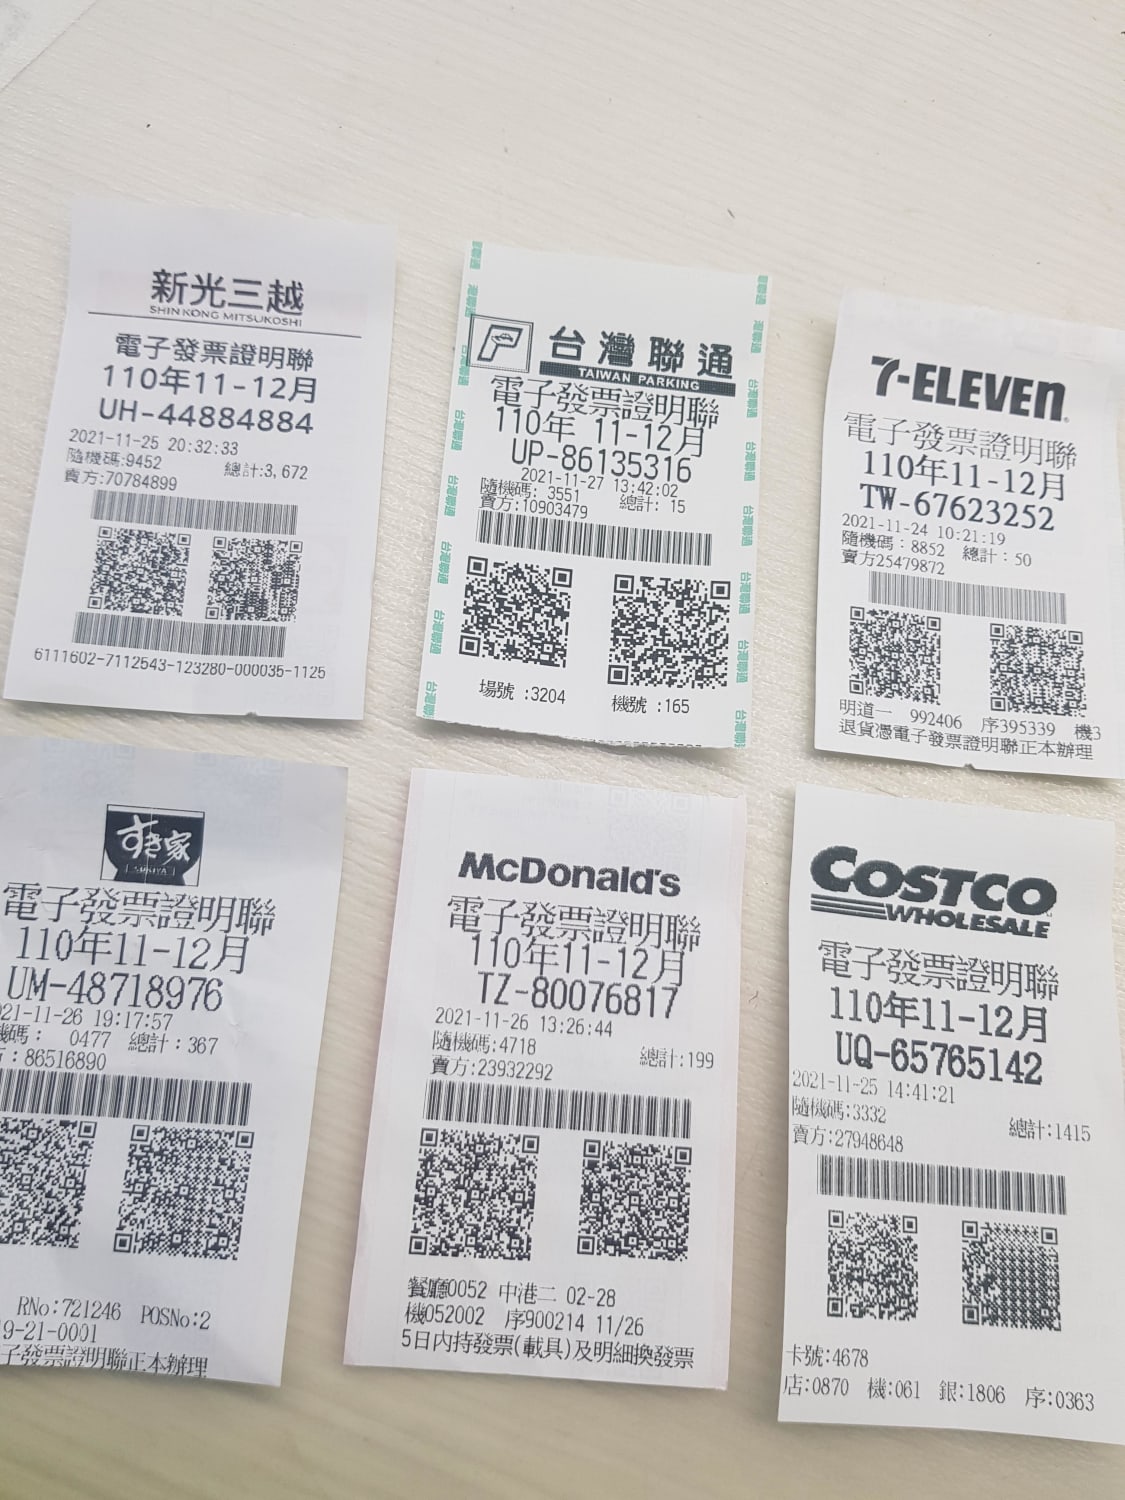 To prevent stores from evading tax, every receipt in Taiwan is automatically a lottery ticket, which can win up to 10 million dollars (360,000 USD).